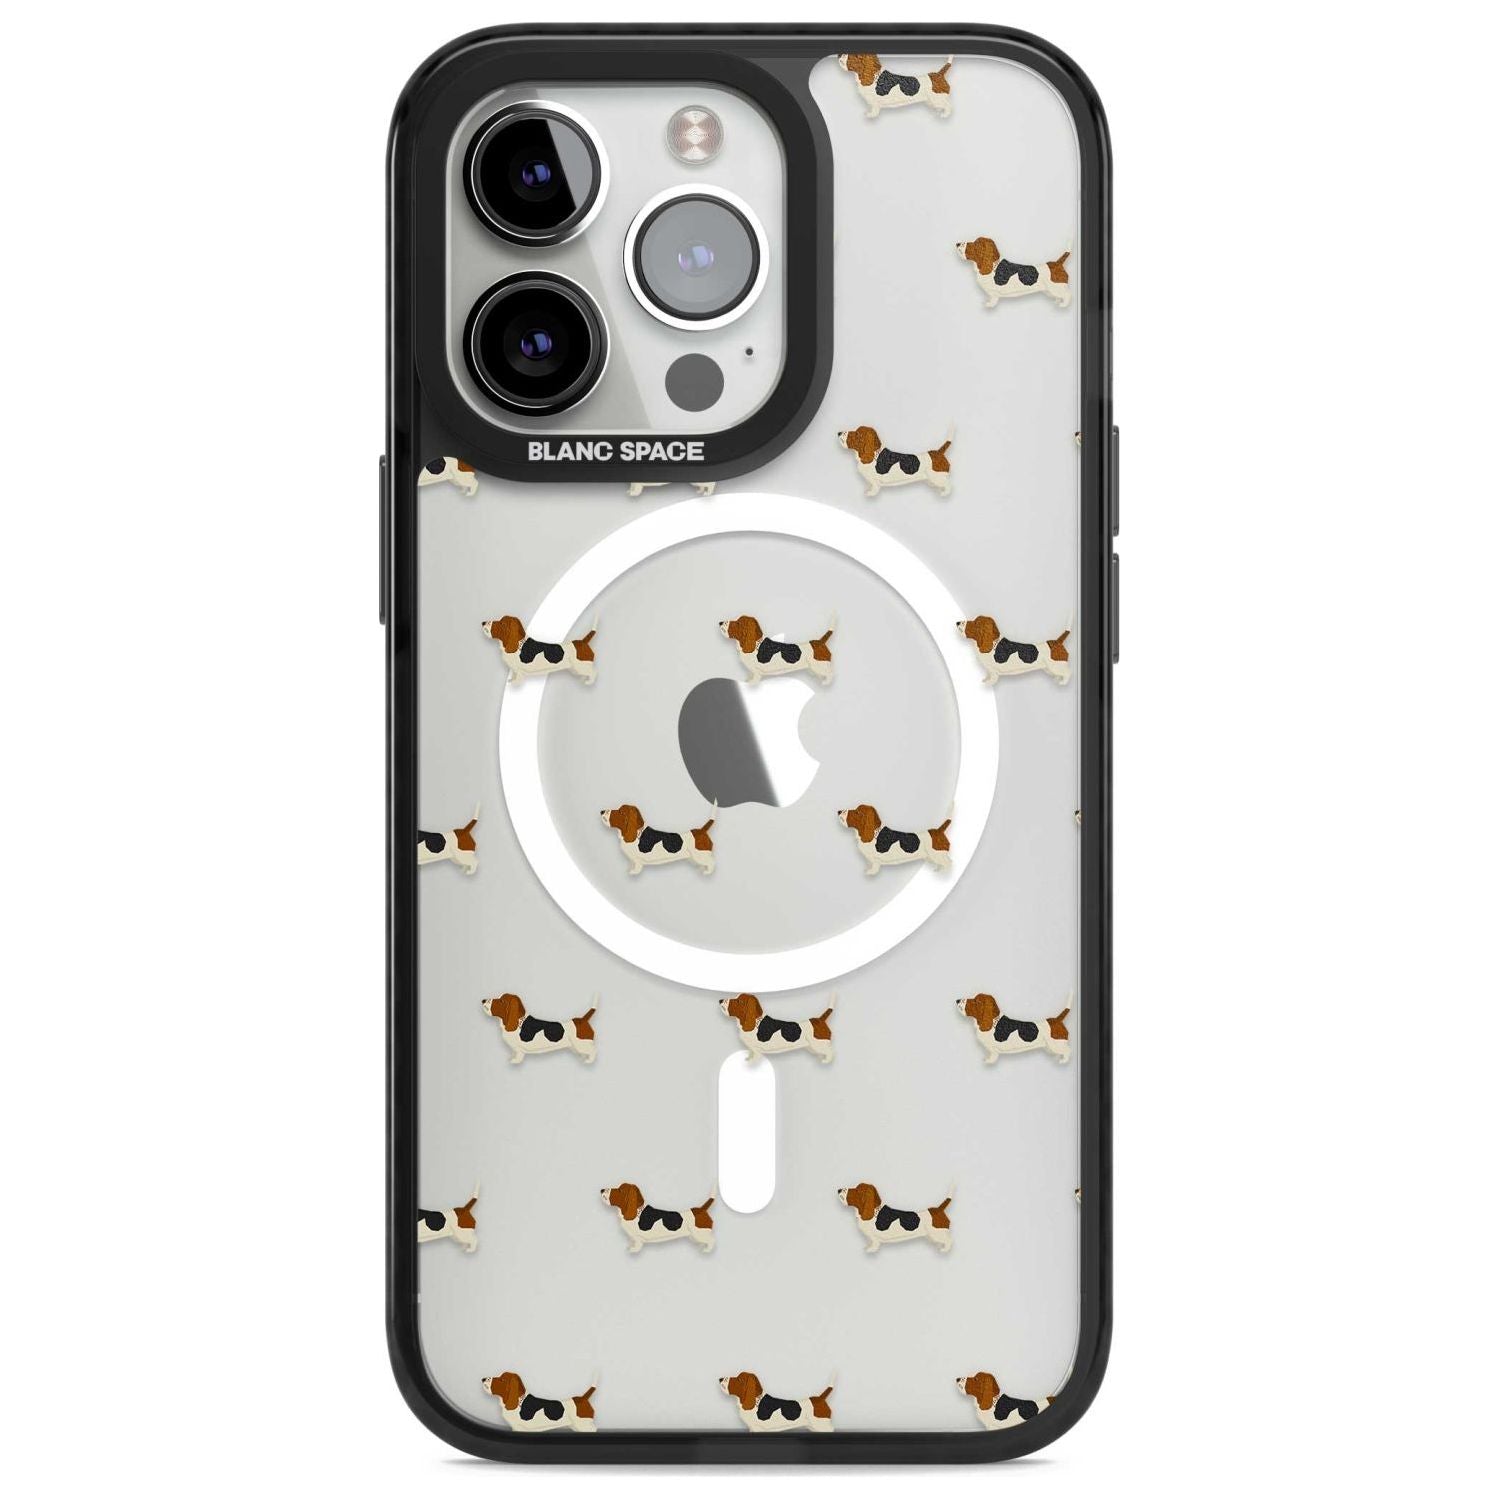 Basset Hound Dog Pattern Clear Phone Case iPhone 15 Pro Max / Magsafe Black Impact Case,iPhone 15 Pro / Magsafe Black Impact Case,iPhone 14 Pro Max / Magsafe Black Impact Case,iPhone 14 Pro / Magsafe Black Impact Case,iPhone 13 Pro / Magsafe Black Impact Case Blanc Space